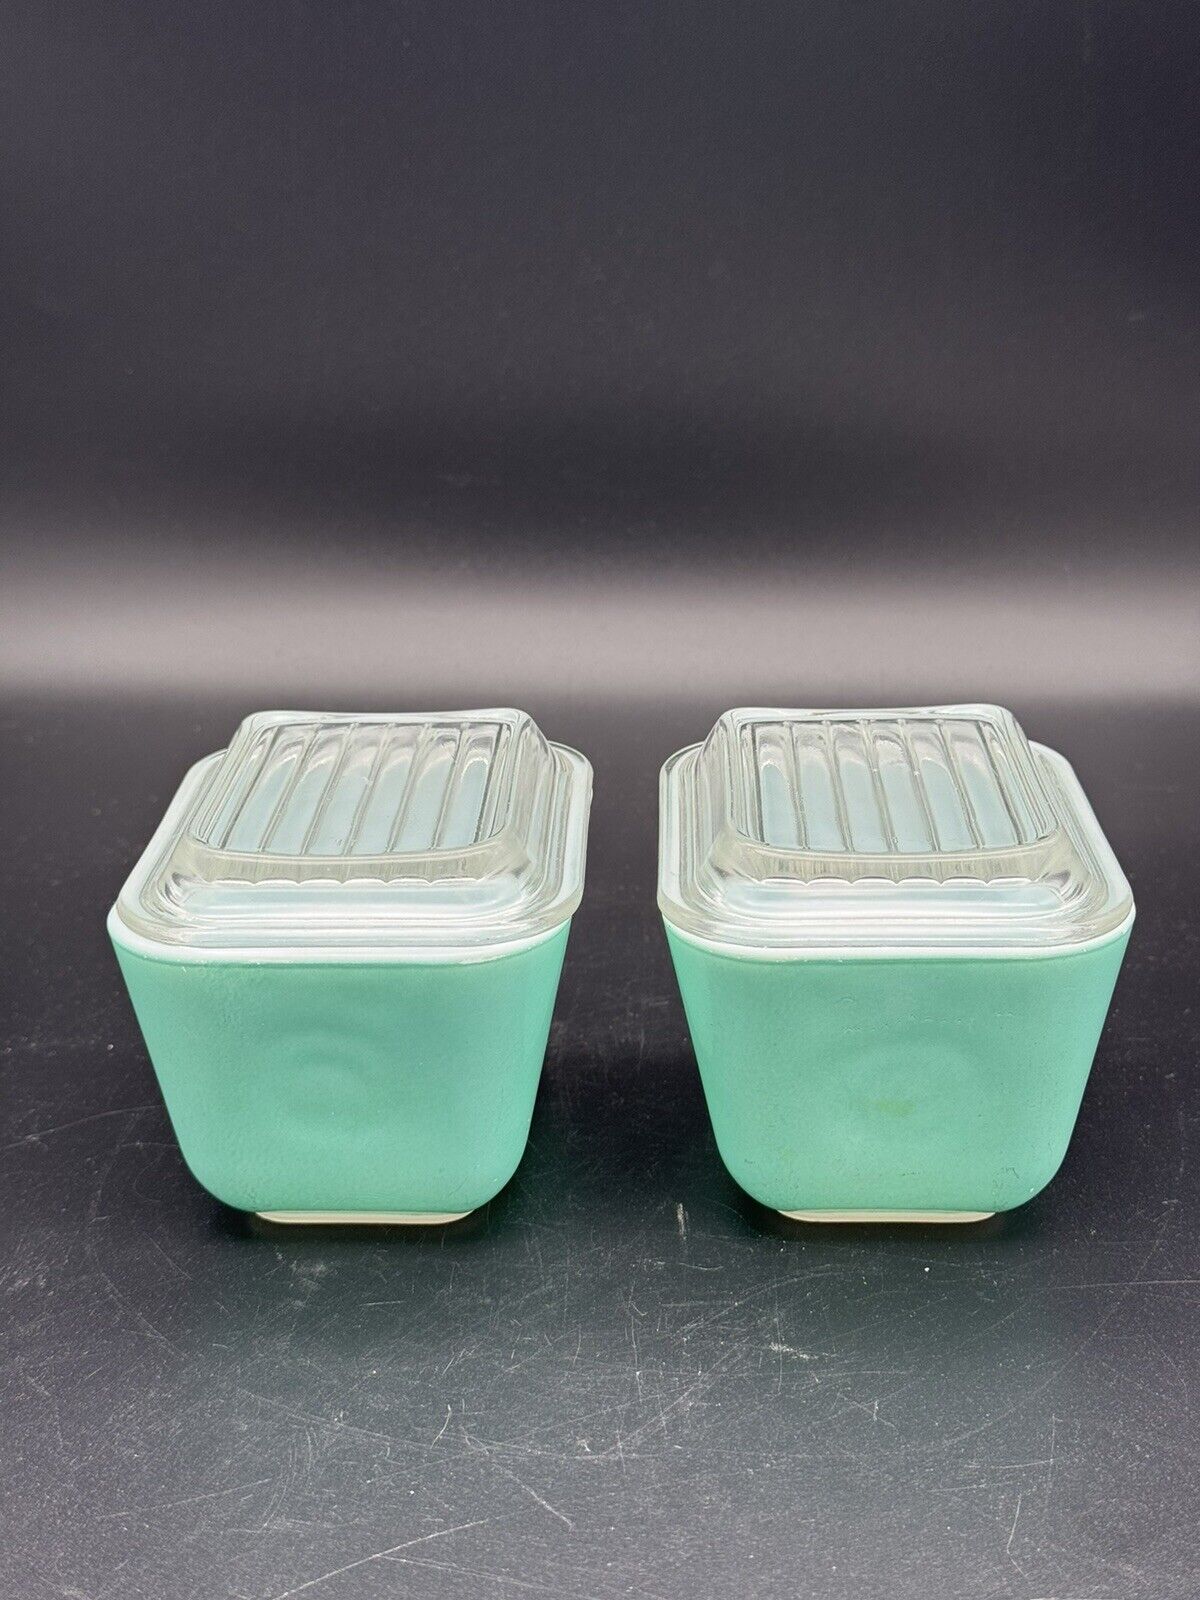 1950’s Vintage Pyrex #0501 Robin Egg Turquoise Blue Dishes with Lids